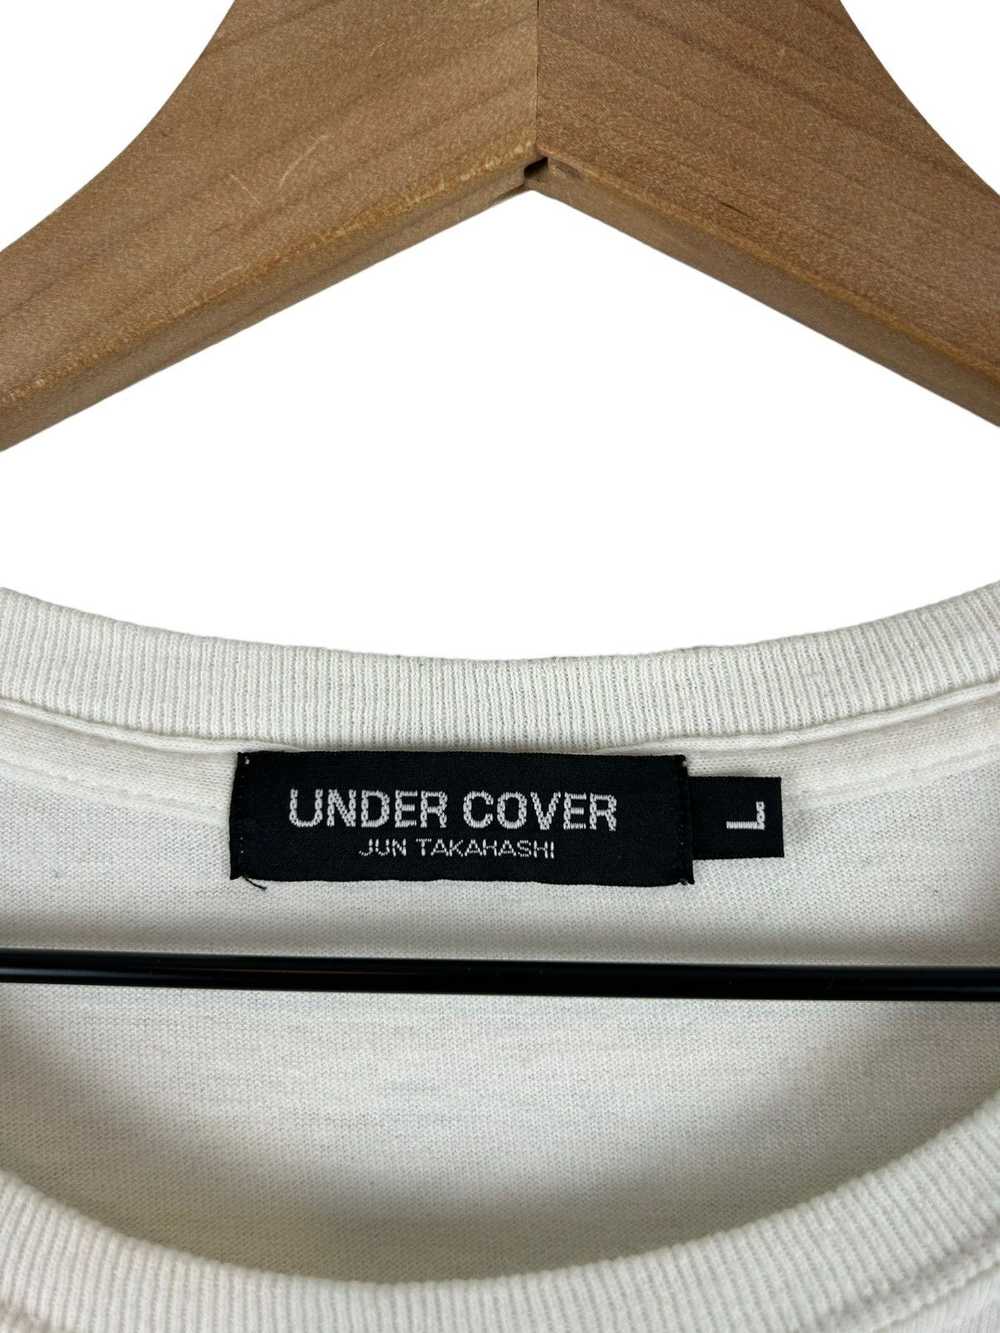 Undercover Undercover Stay Home Print T-Shirt - image 5